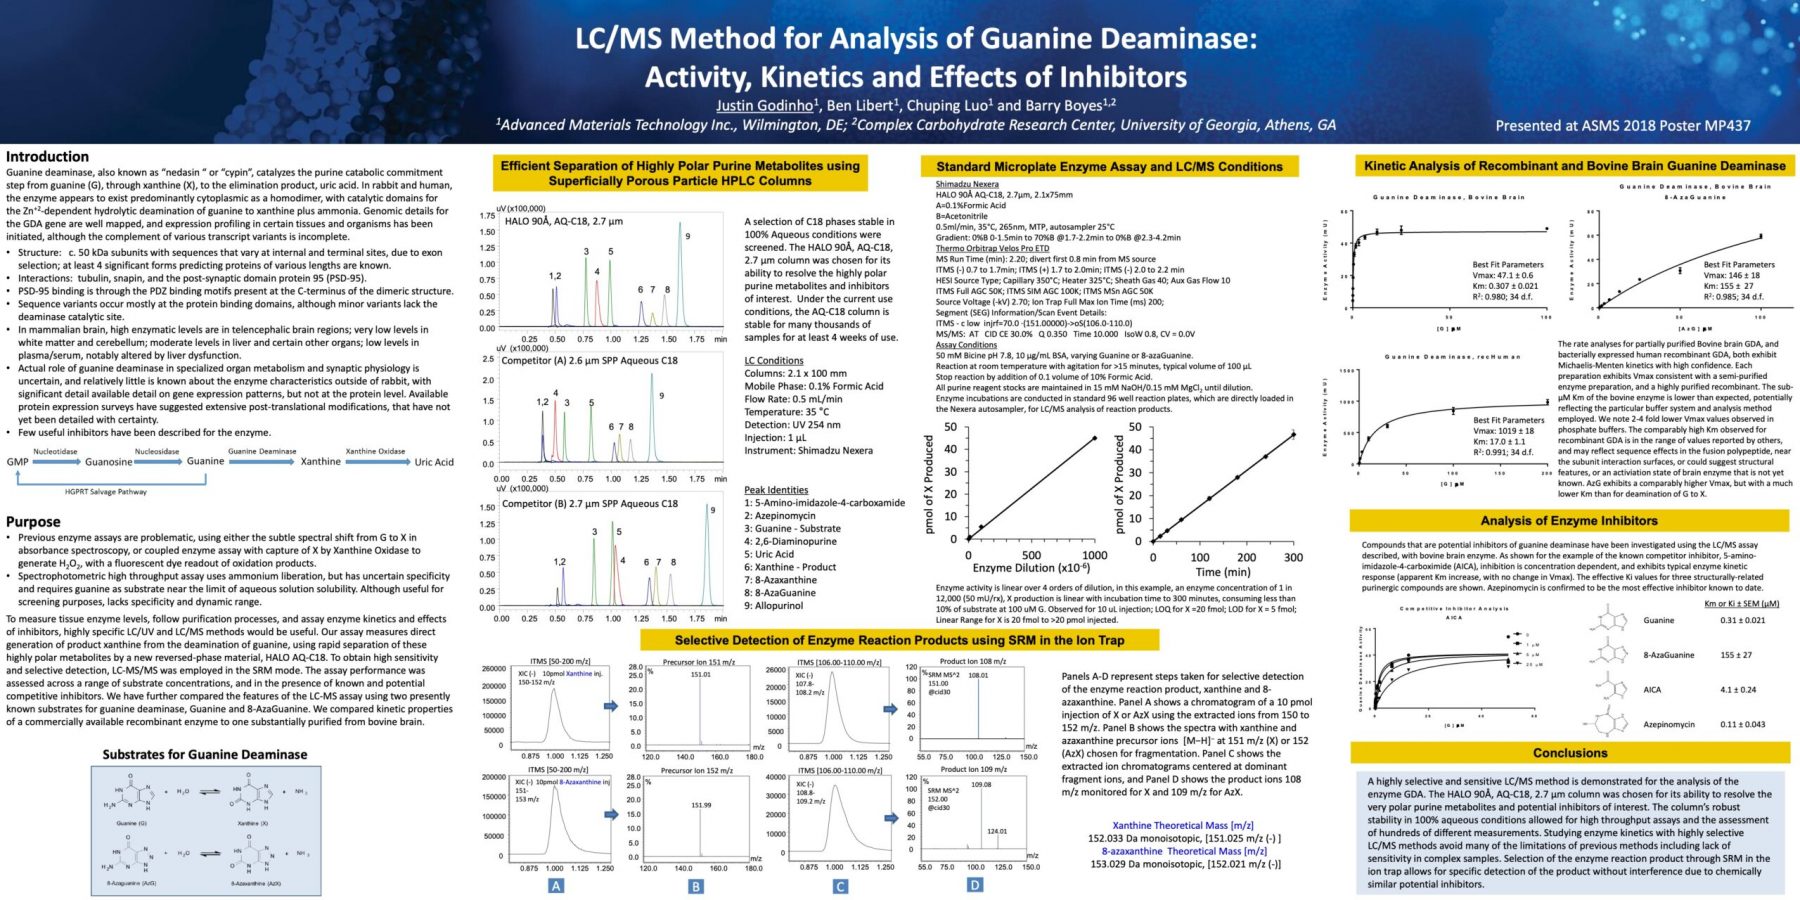 lc/ms method for analysis of guanine deaminase